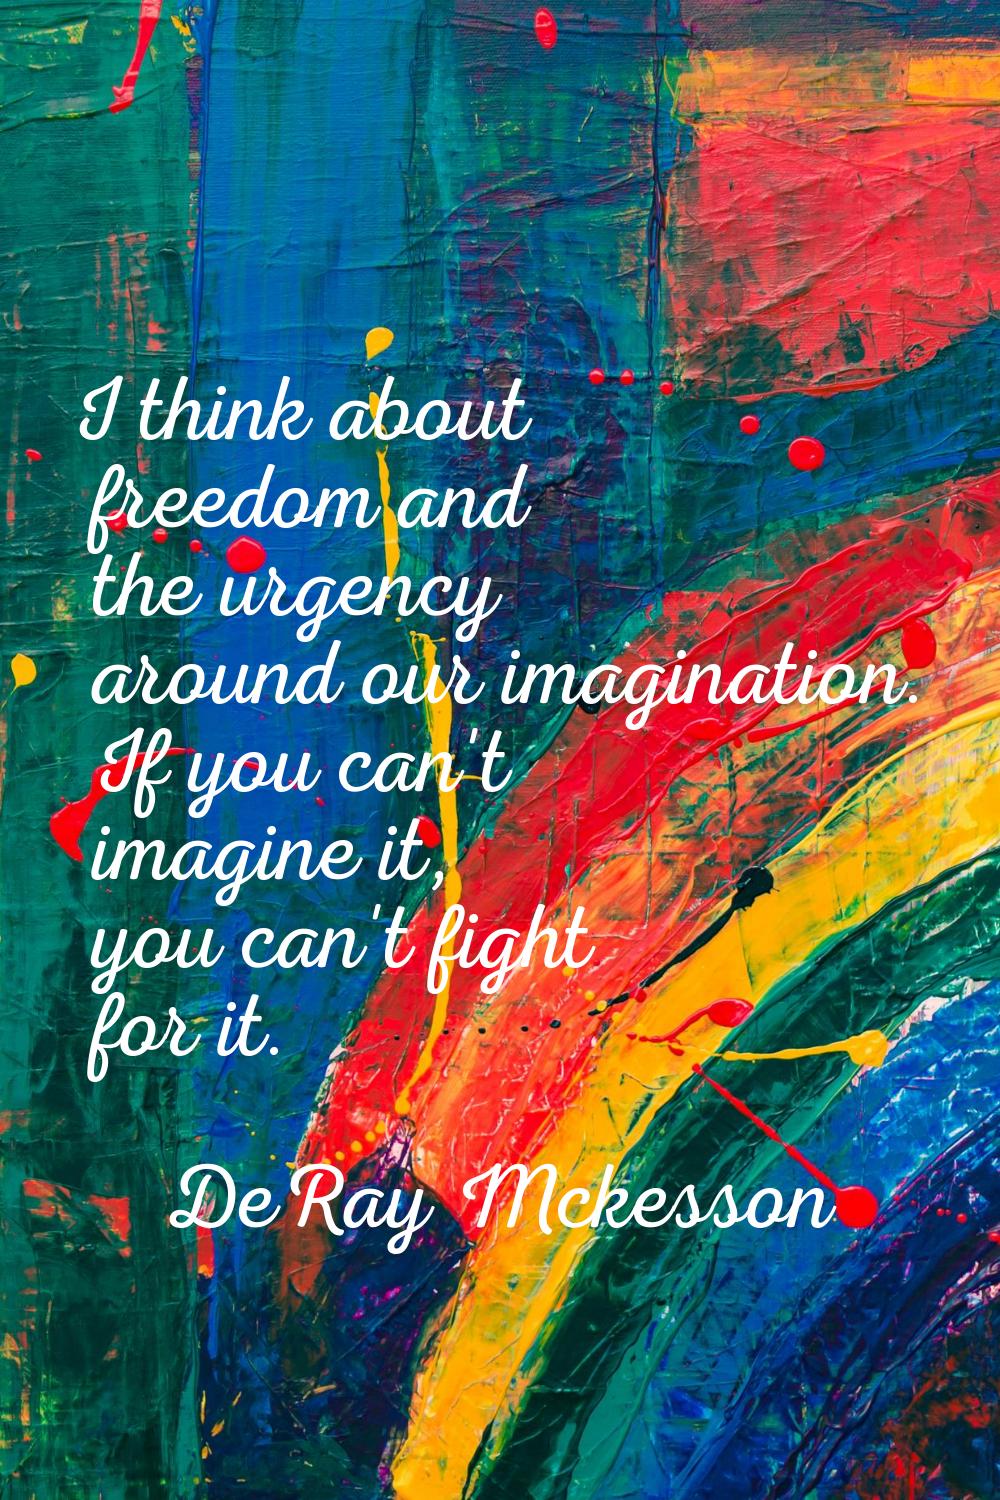 I think about freedom and the urgency around our imagination. If you can't imagine it, you can't fi